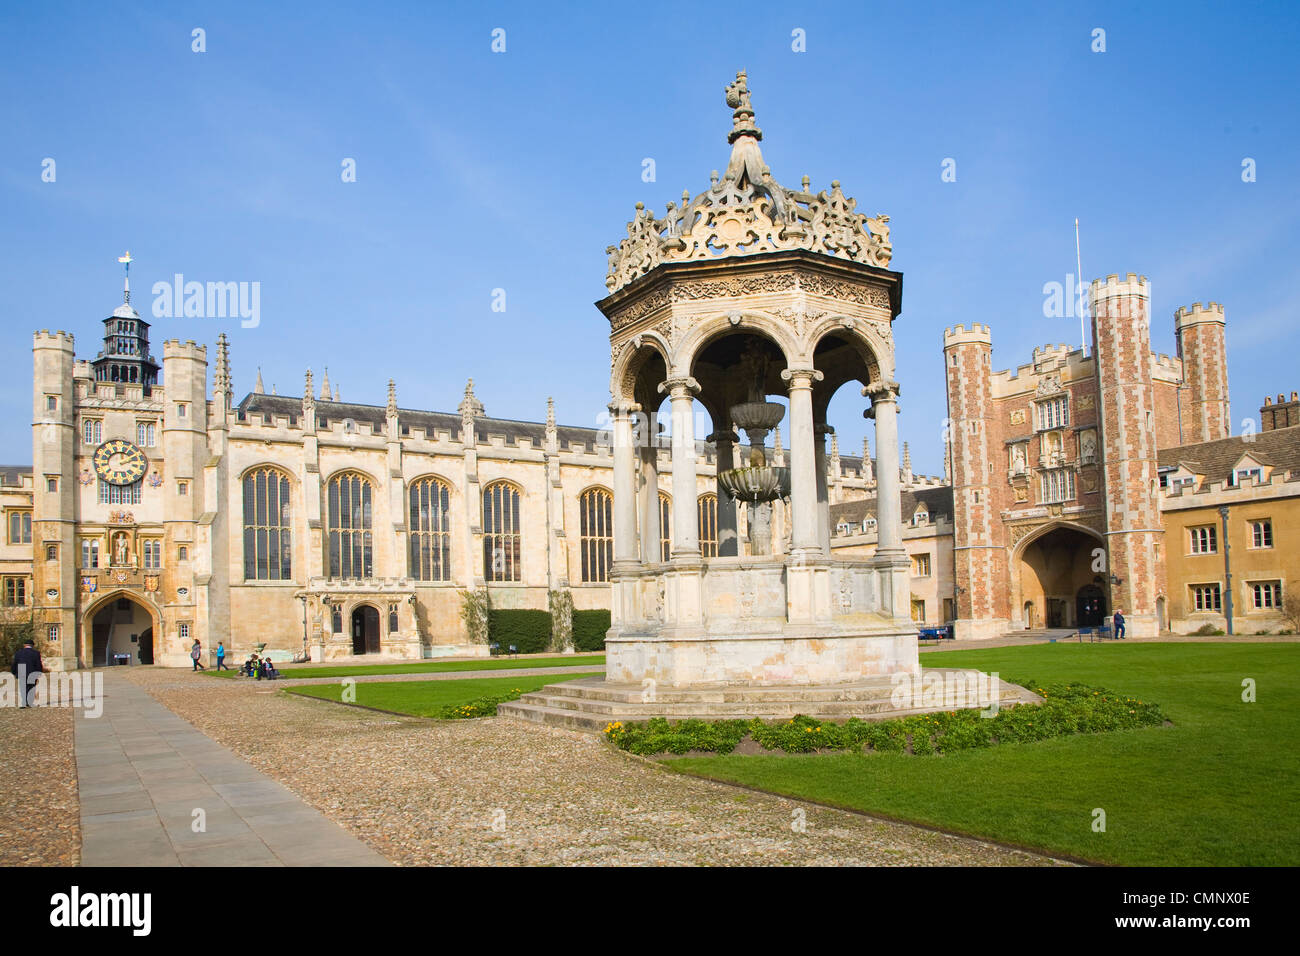 The Great Court, chapel, well and Gatehouse Trinity College Cambridge University England Stock Photo